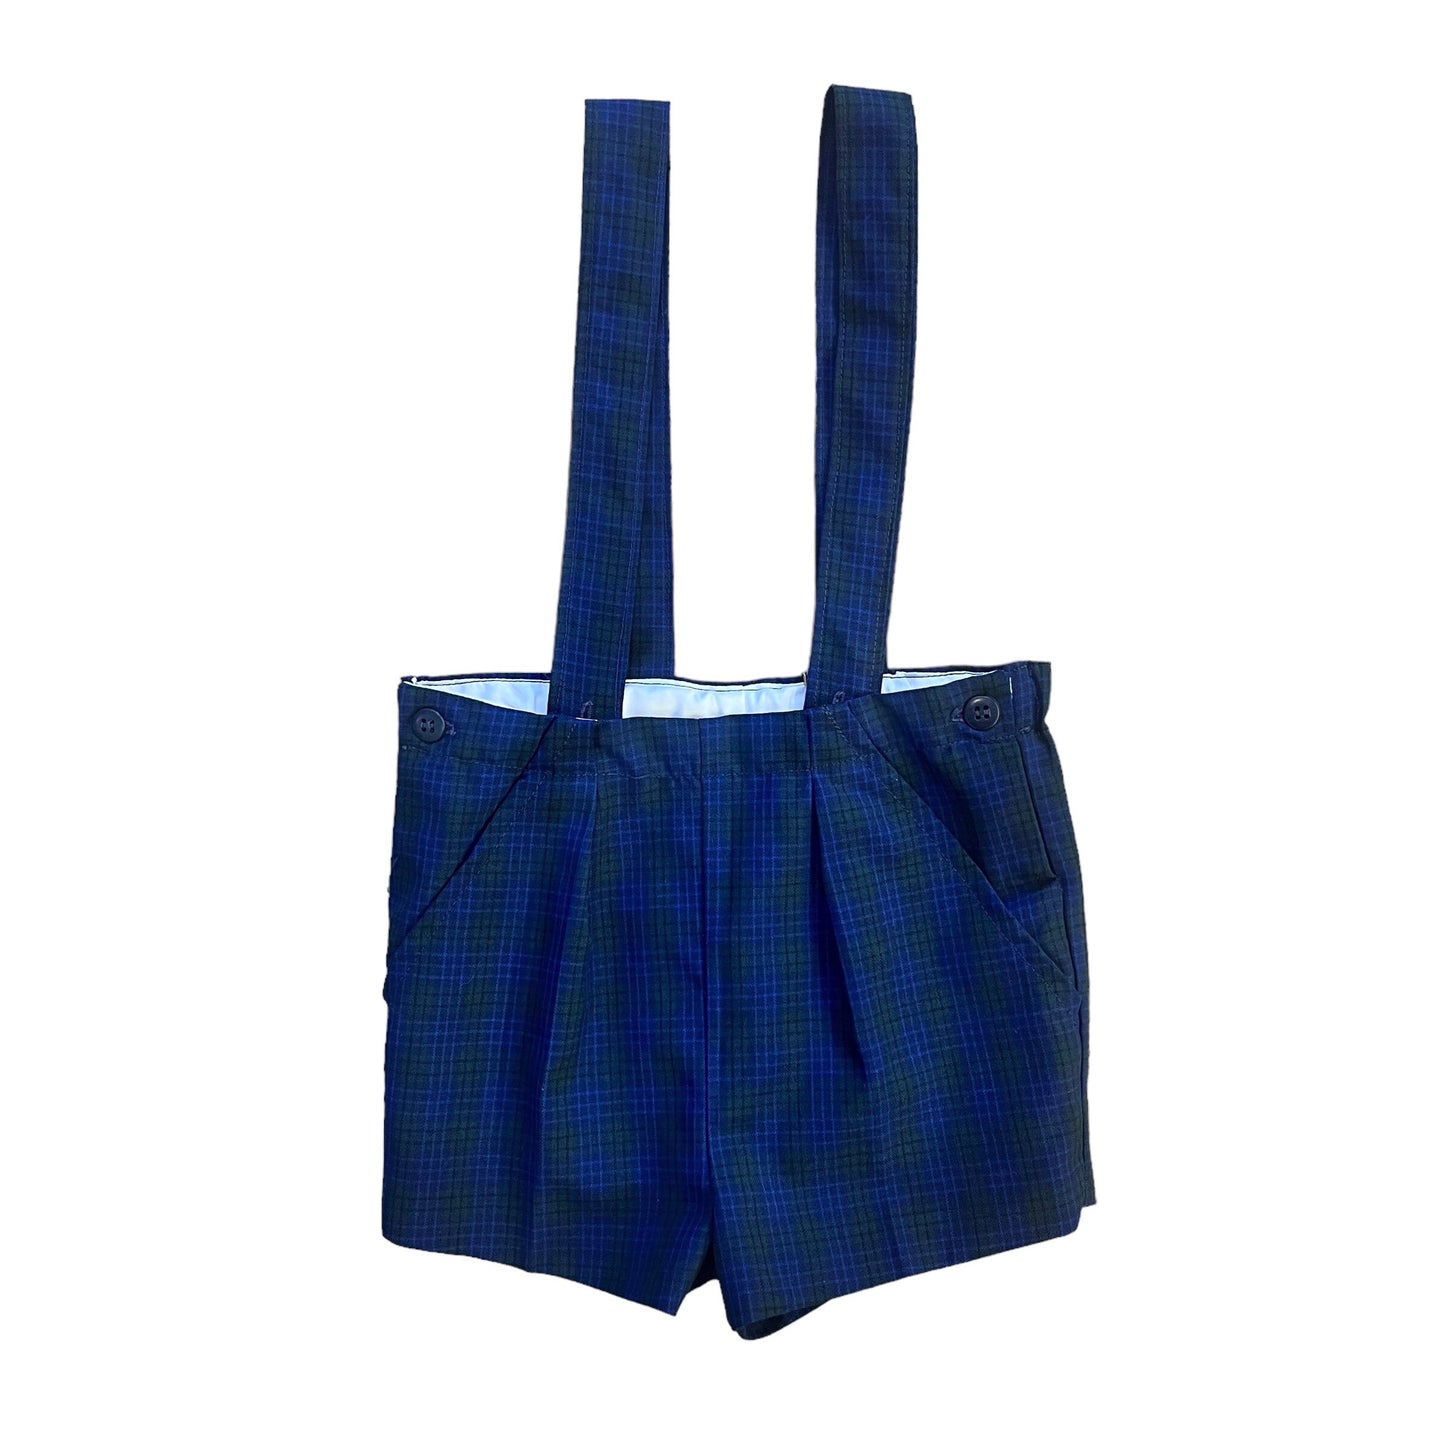 1960s Blue/Green Suspenders Shorts / 18-24M